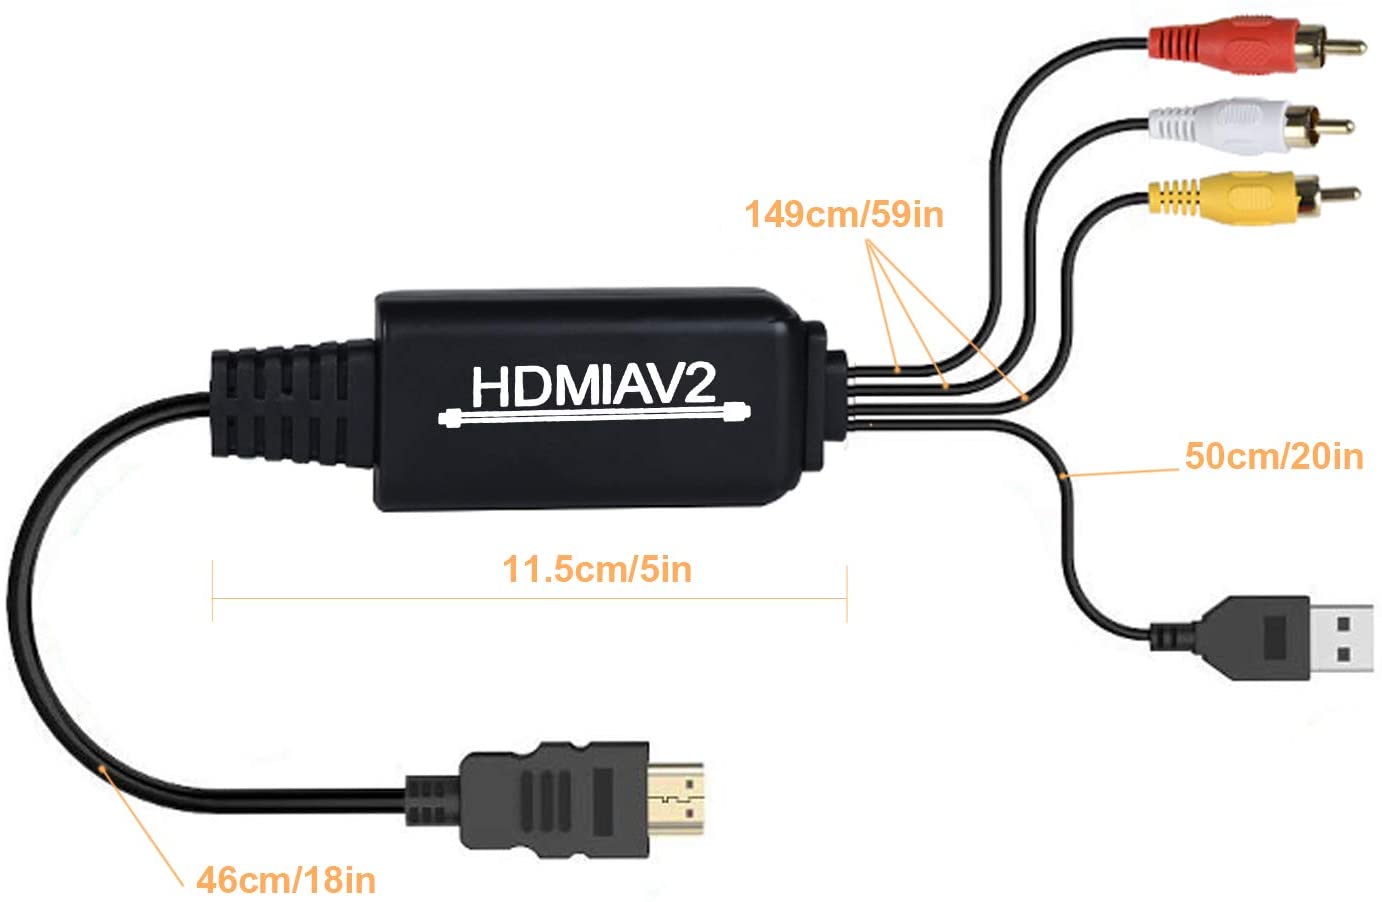 DIGITNOW! HDMI to RCA Converter, HDMI to RCA Cable Adapter, 1080P HDMI to AV 3RCA CVBs Composite Video Audio Supports NTSC for PC, Laptop, HDTV, DVD, VHC VCR